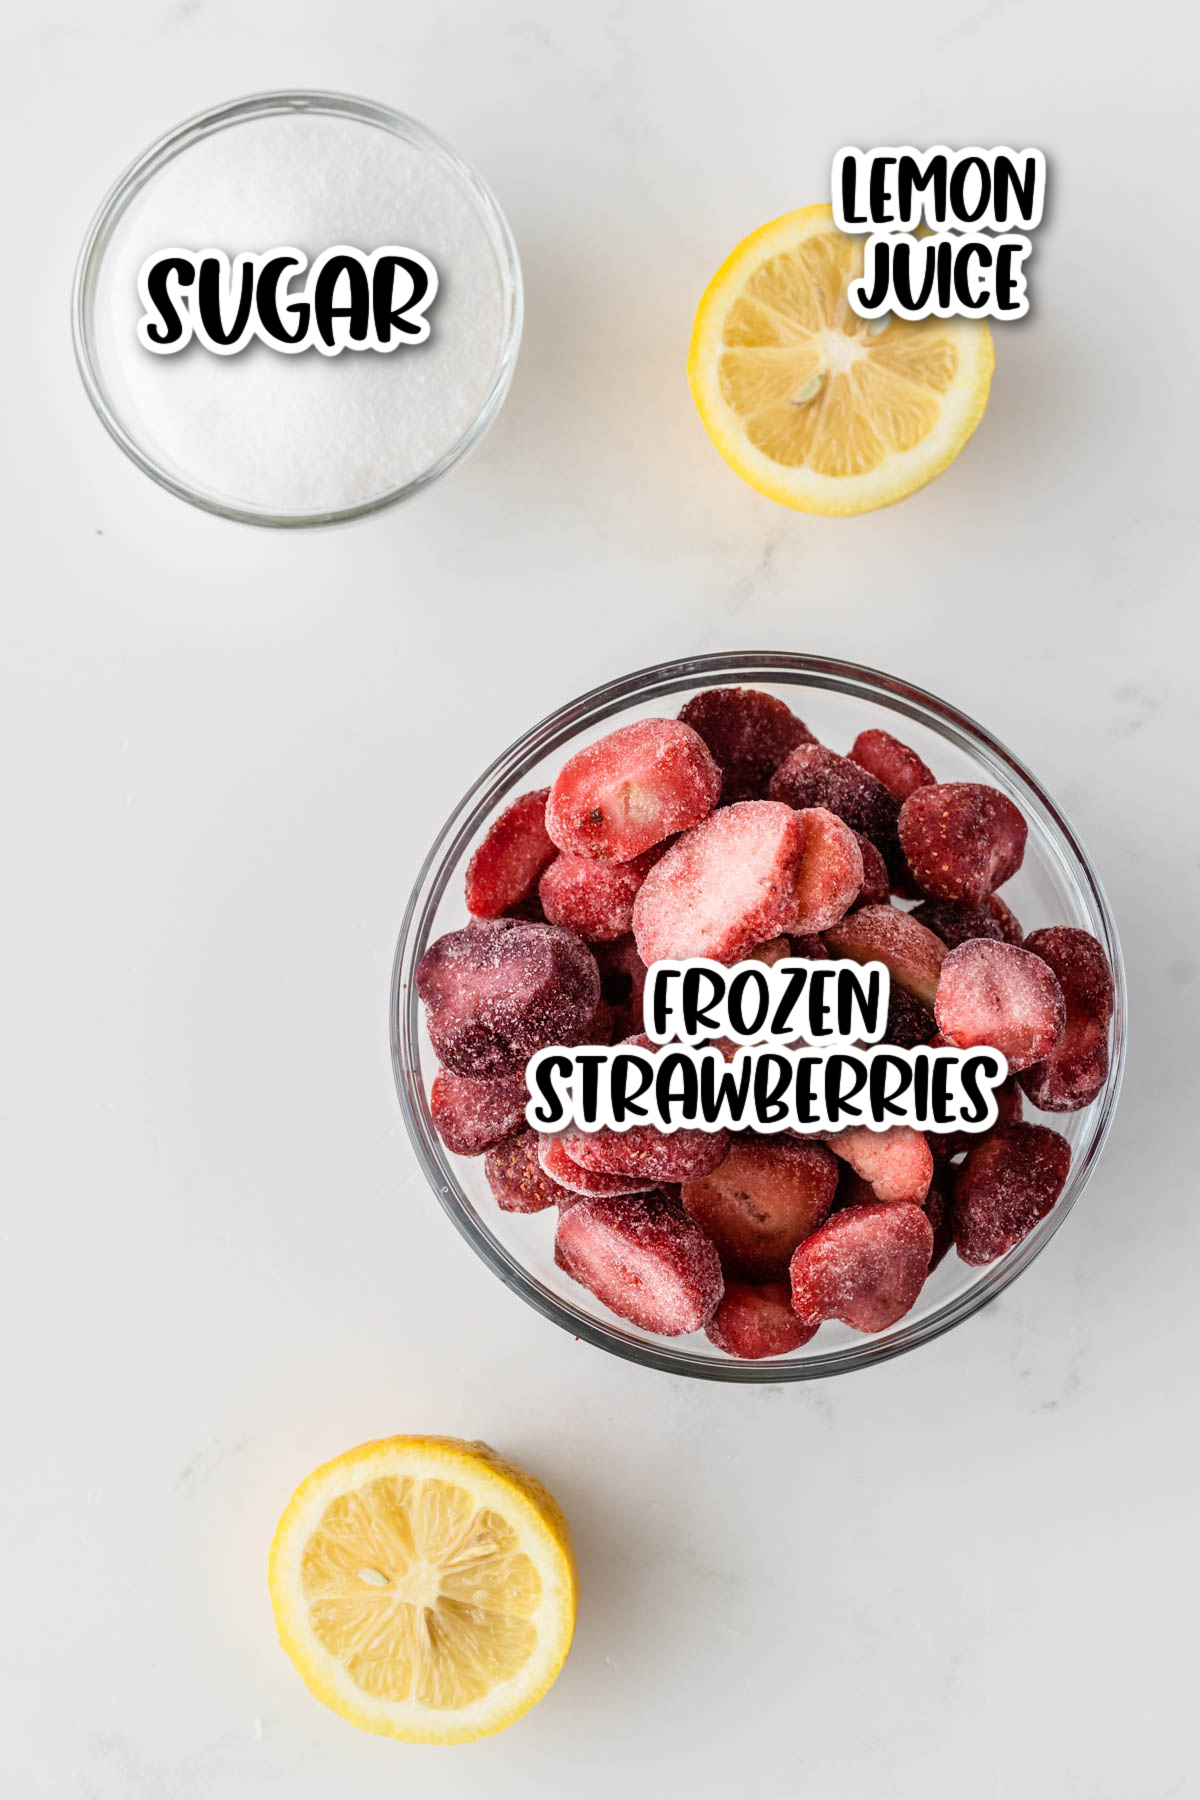 A bowl of frozen strawberries with containers of sugar and lemon juice labeled, arranged on a marble surface.